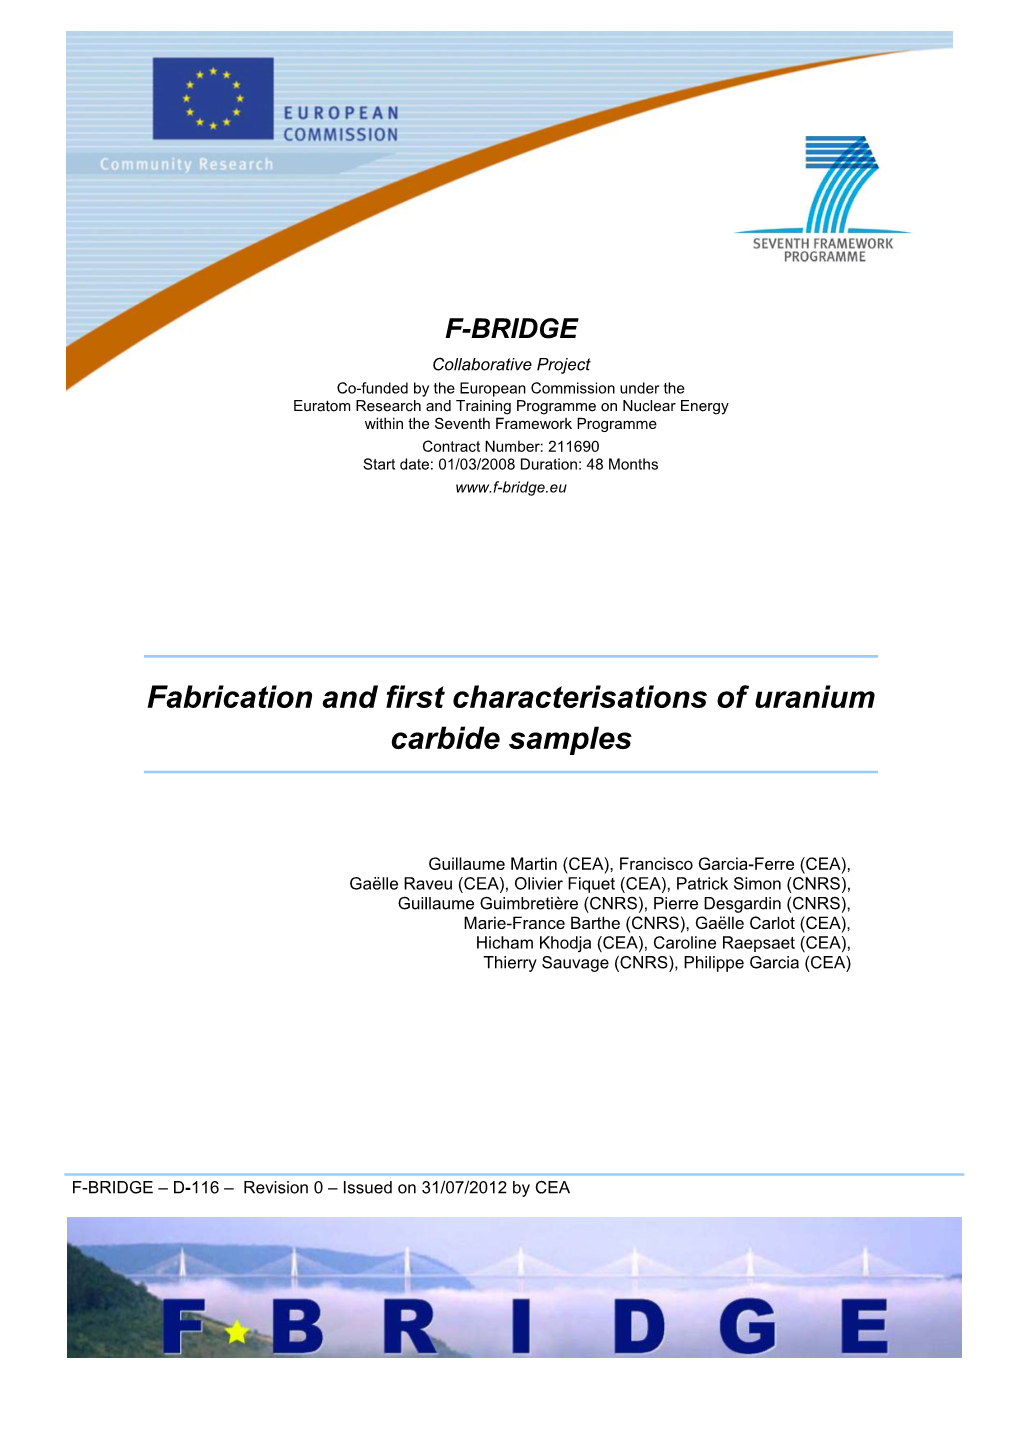 Fabrication and First Characterisations of Uranium Carbide Samples